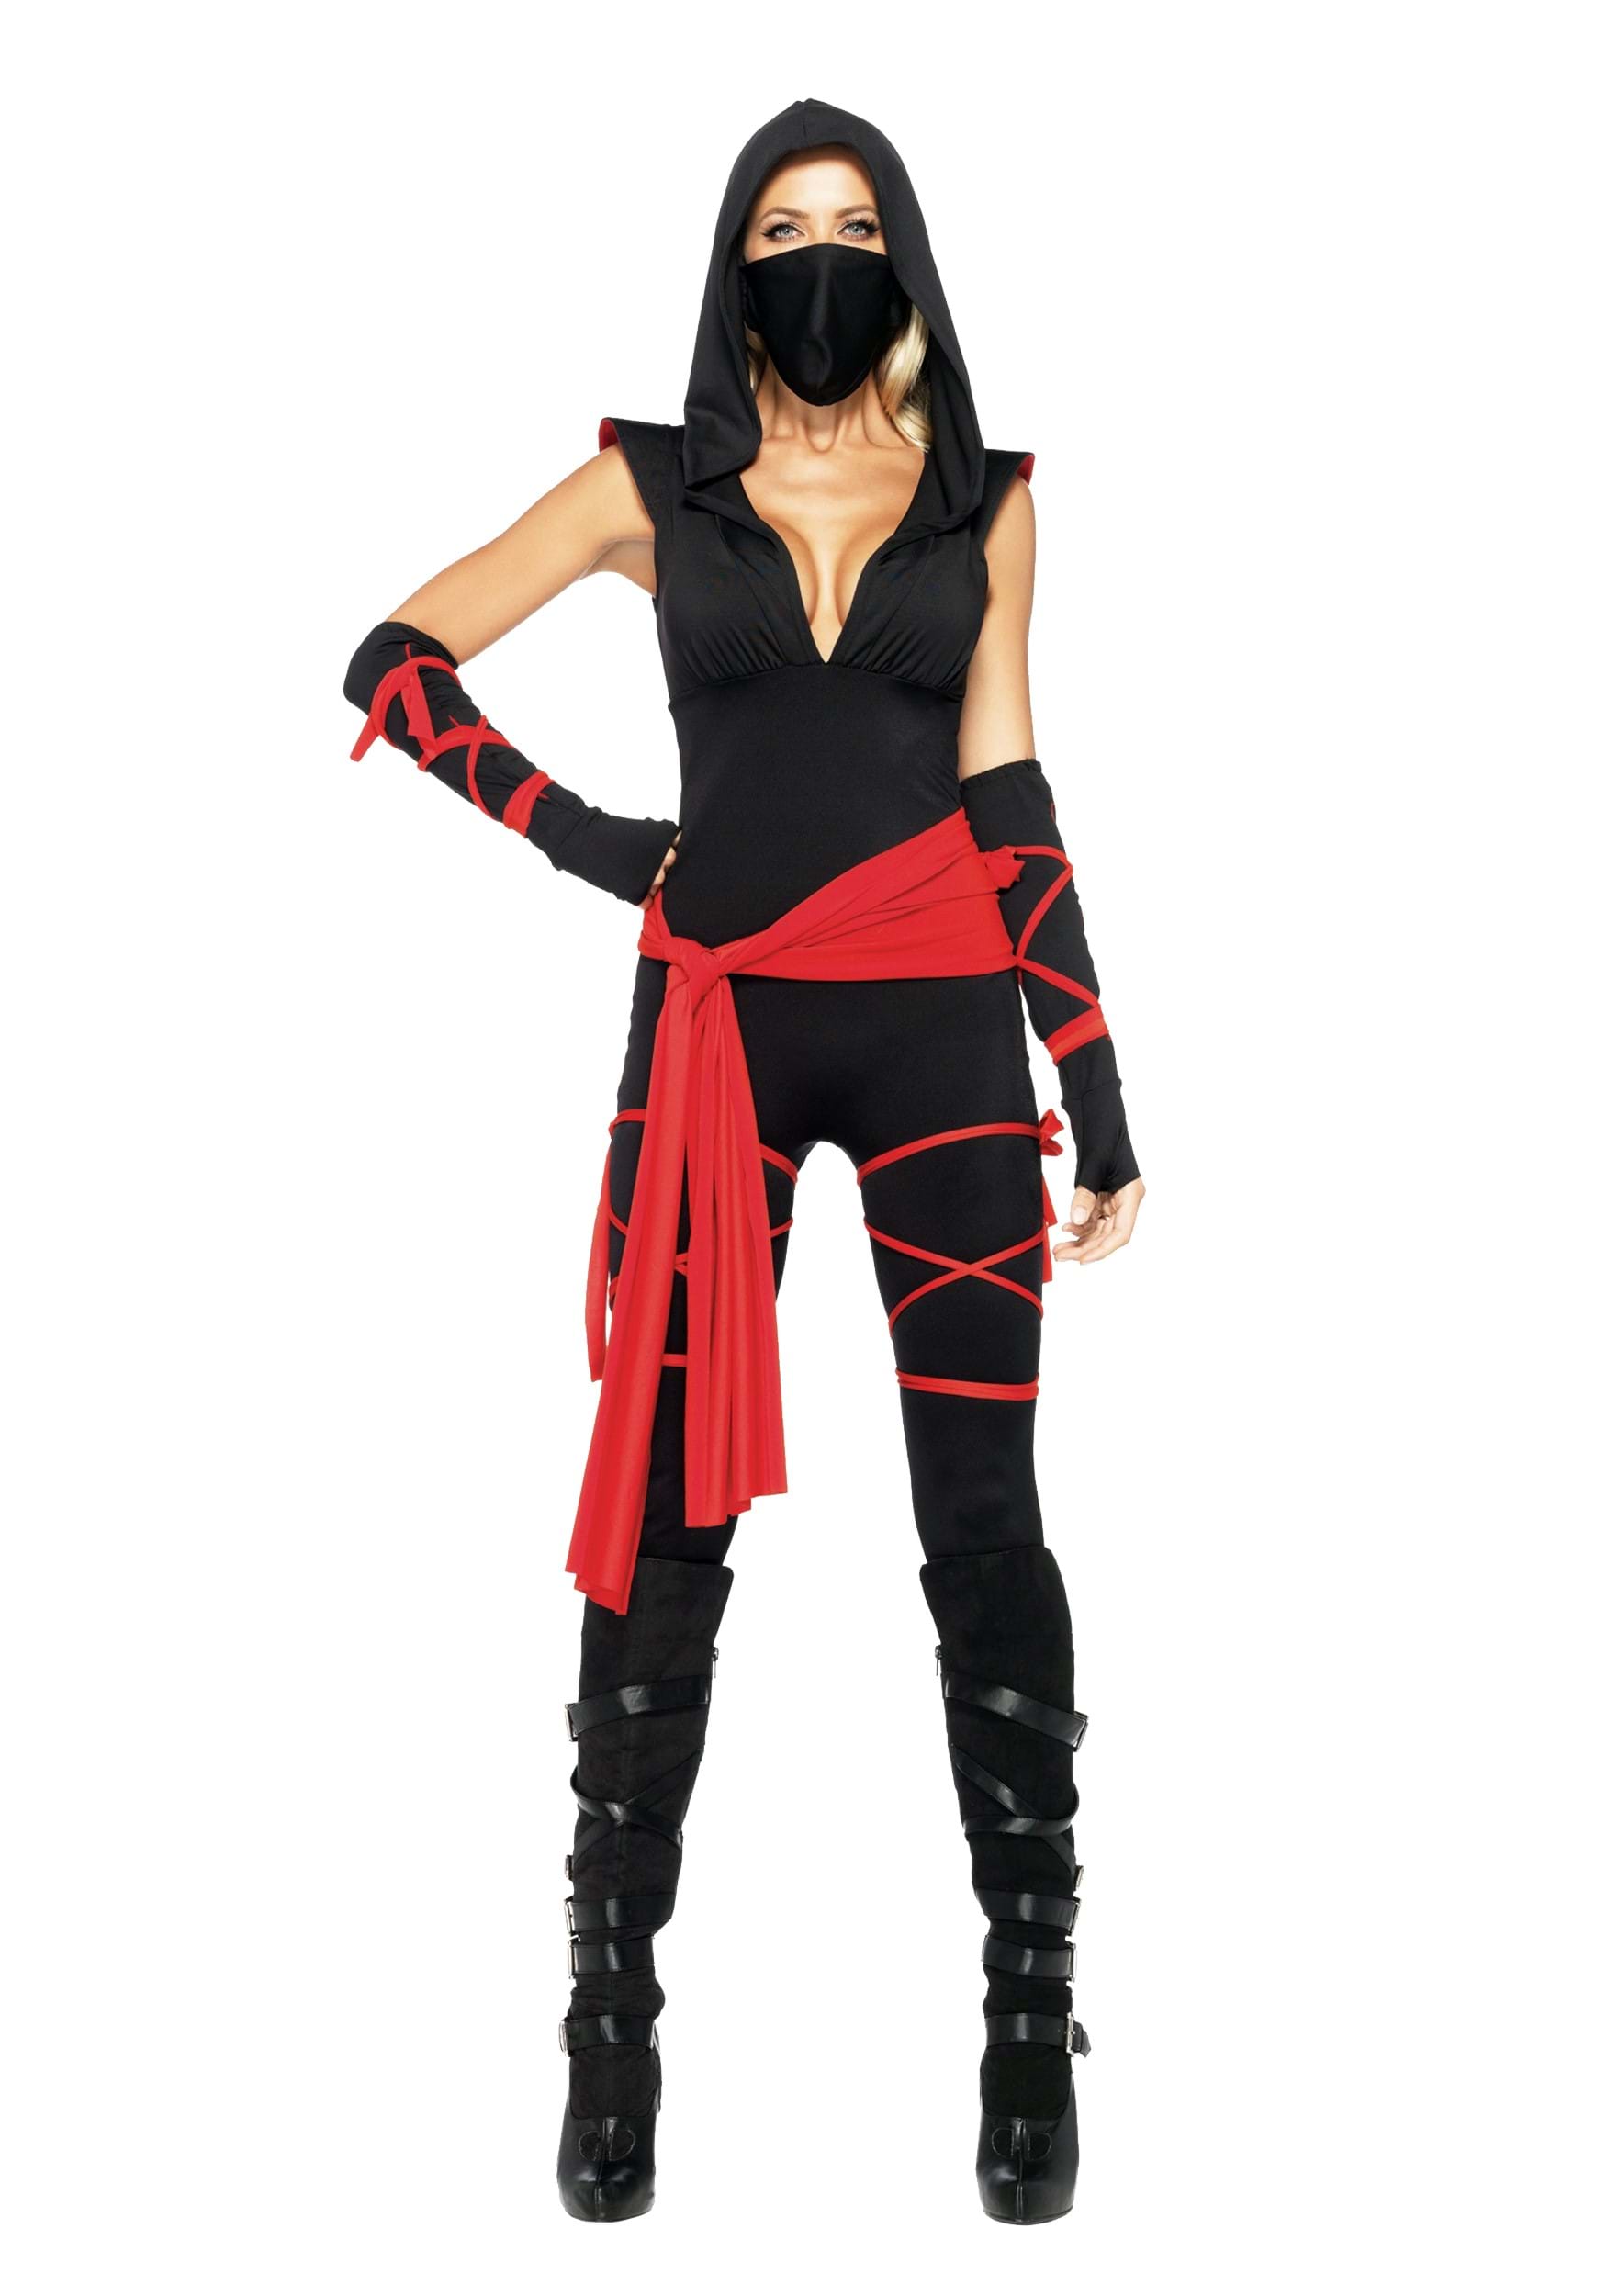 https://images.fun.com/products/14257/2-1-296393/sexy-deadly-ninja-costume-alt-8.jpg